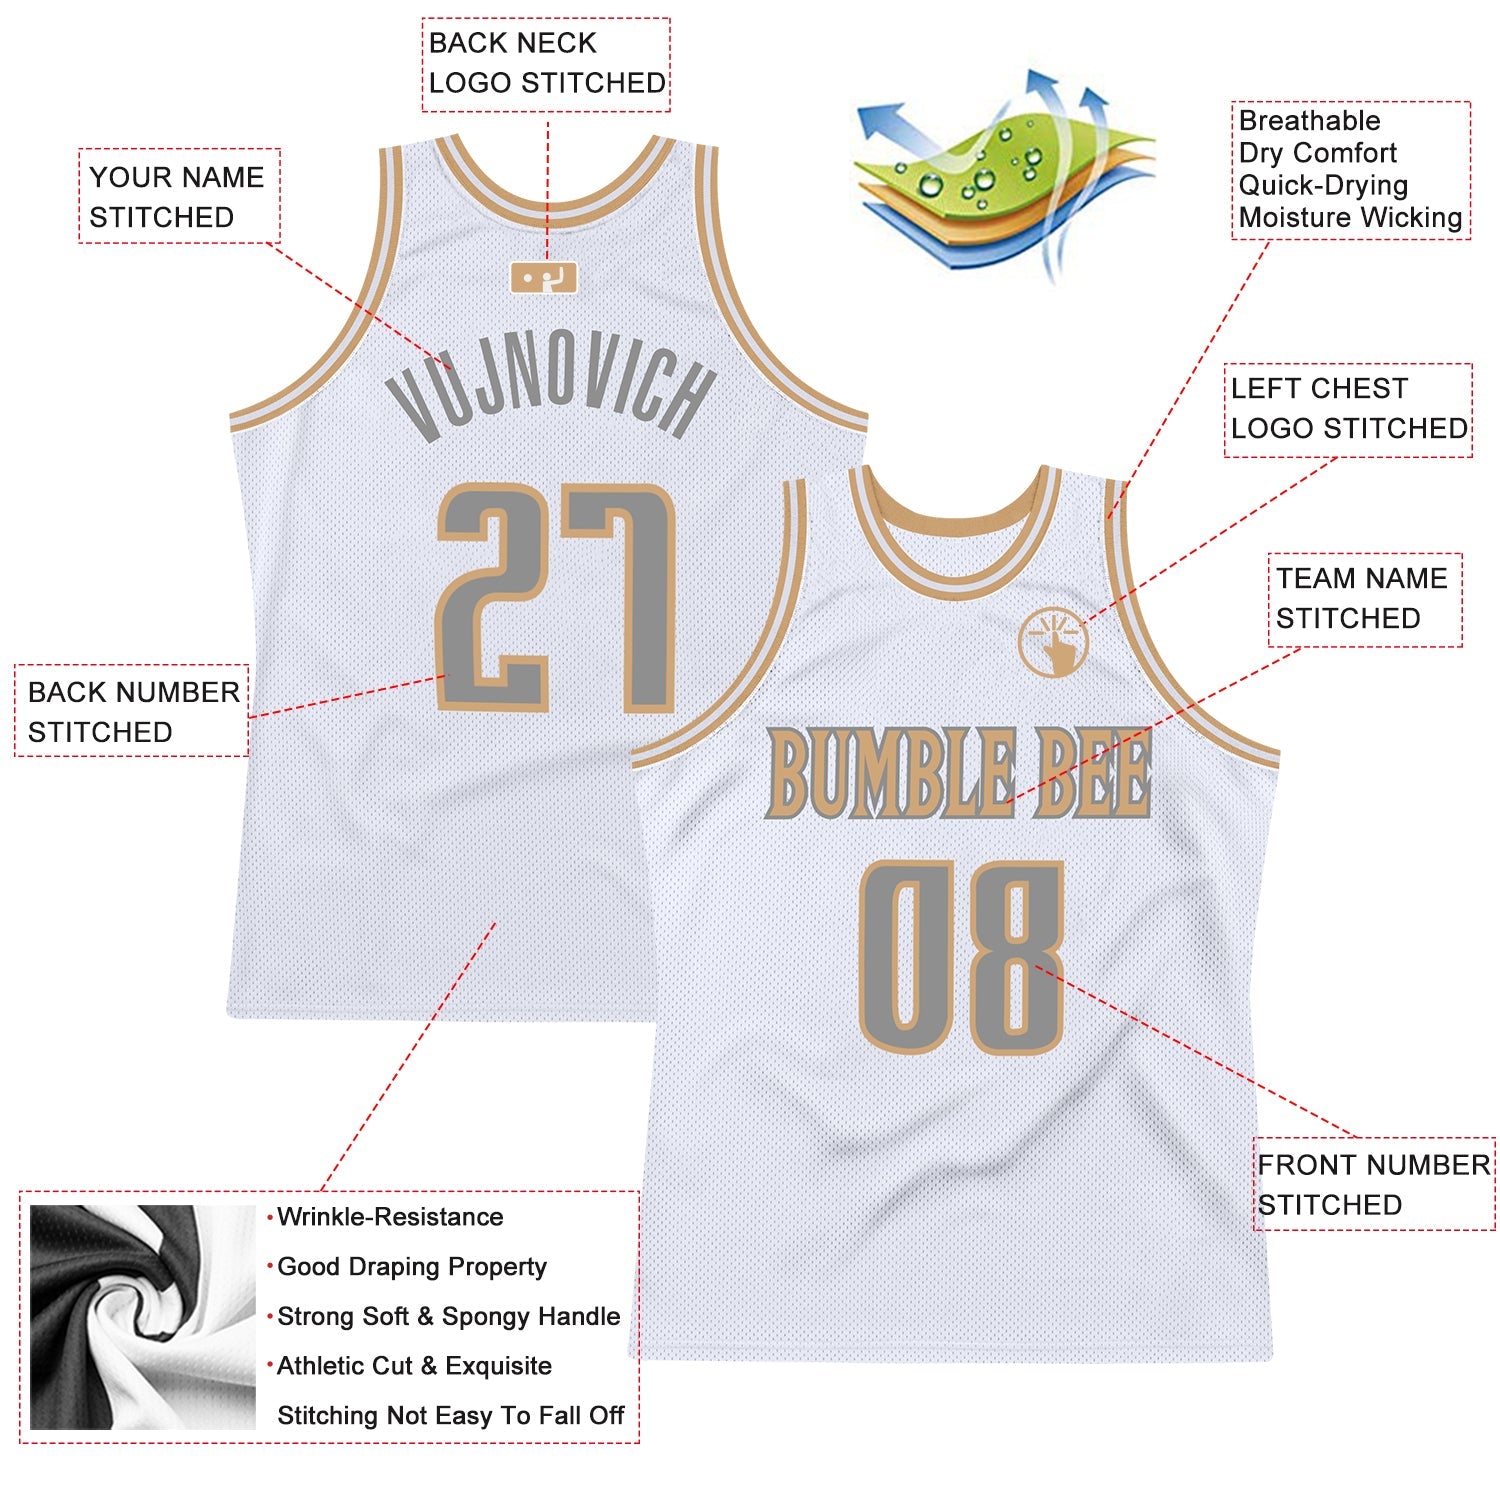 Custom White Steel Gray-Old Gold Authentic Throwback Basketball Jersey